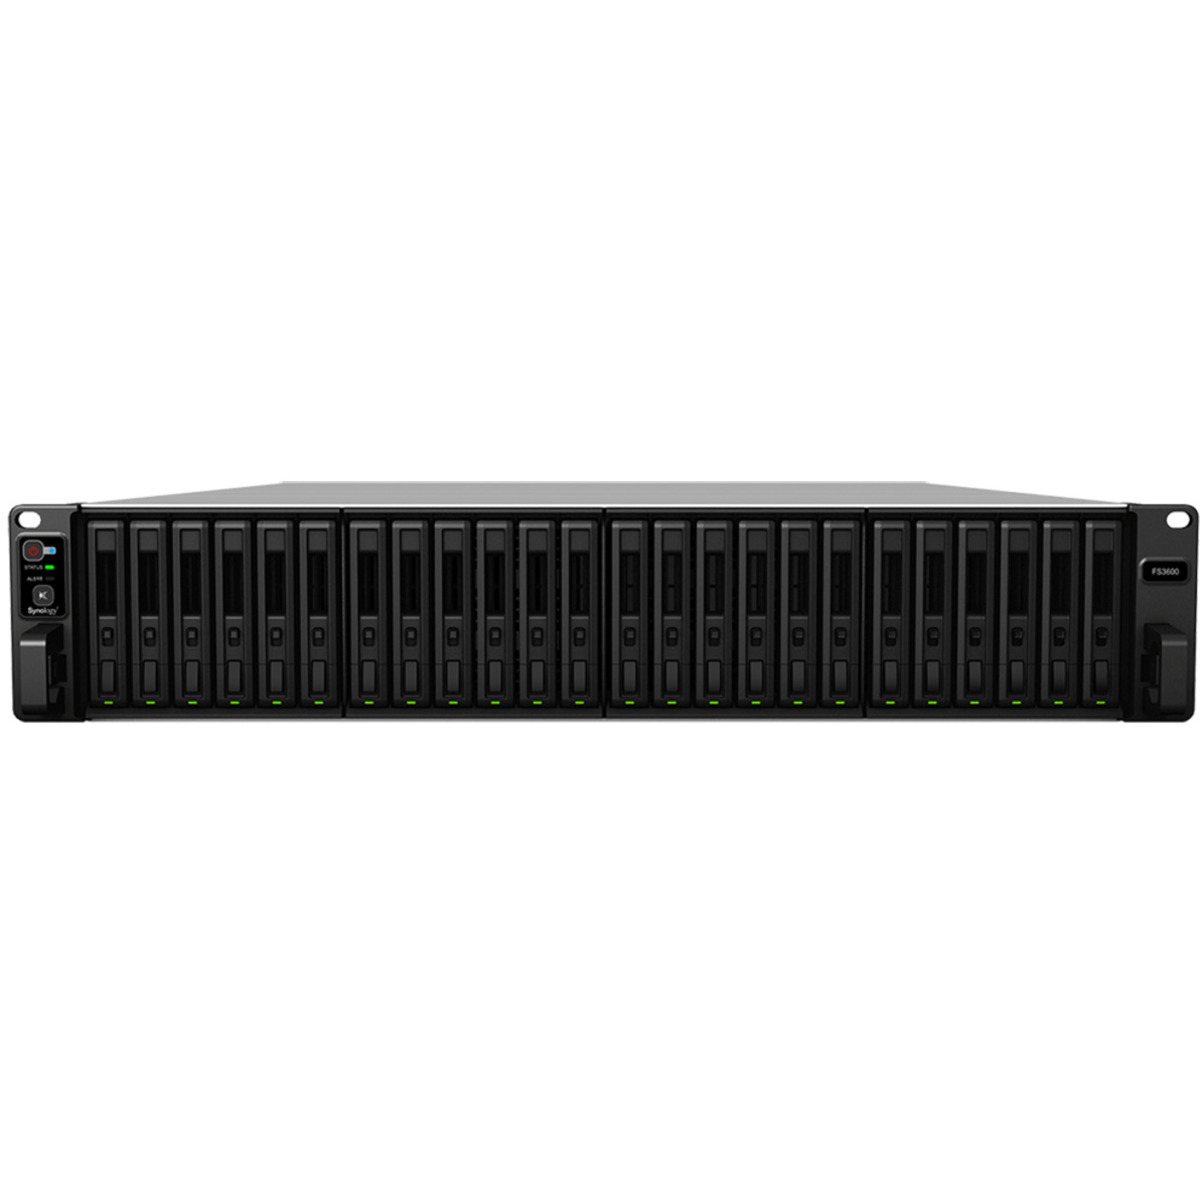 Synology FlashStation FS3600 76tb 24-Bay RackMount Large Business / Enterprise NAS - Network Attached Storage Device 19x4tb Crucial MX500 CT4000MX500SSD1 2.5 560/510MB/s SATA 6Gb/s SSD CONSUMER Class Drives Installed - Burn-In Tested - FREE RAM UPGRADE FlashStation FS3600